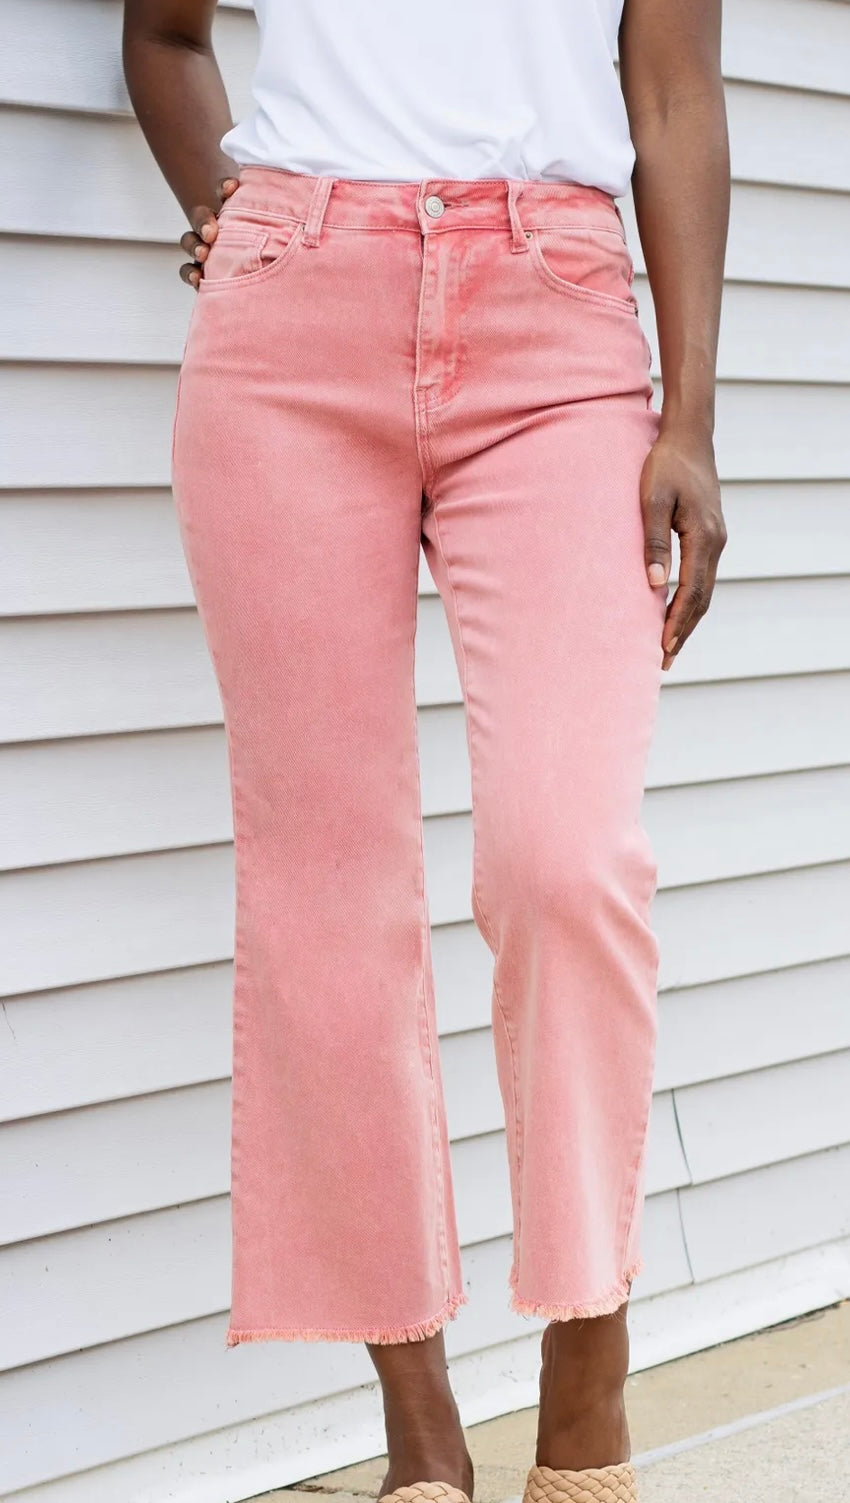 ***DOORBUSTER*** It's About Time 2 Colored Denim Wide Leg Jeans in Blackberry Ash Pink